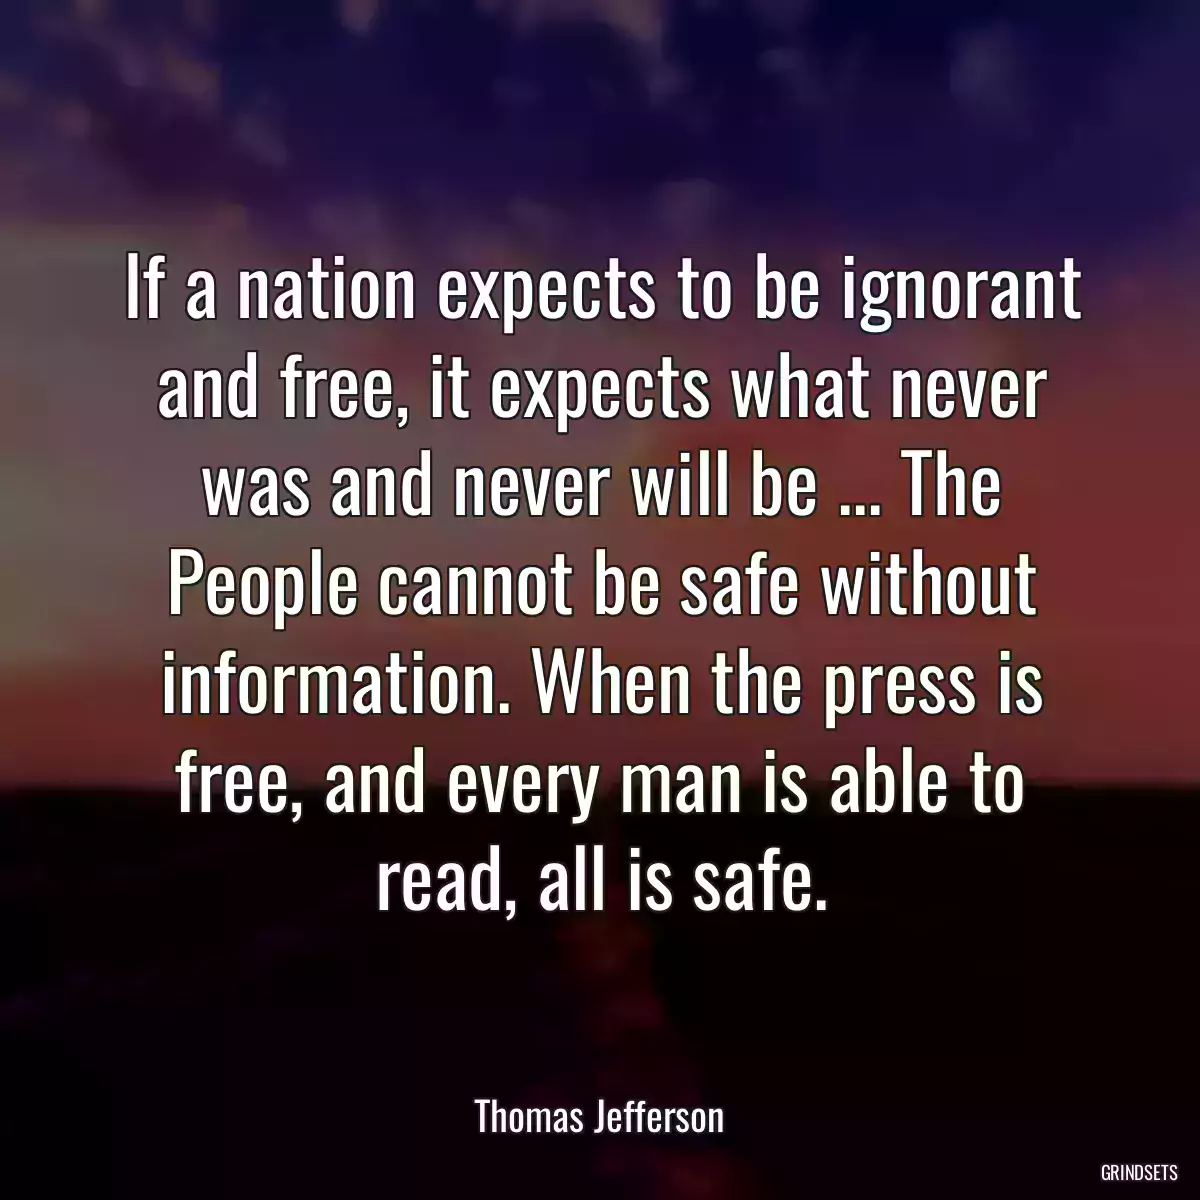 If a nation expects to be ignorant and free, it expects what never was and never will be ... The People cannot be safe without information. When the press is free, and every man is able to read, all is safe.